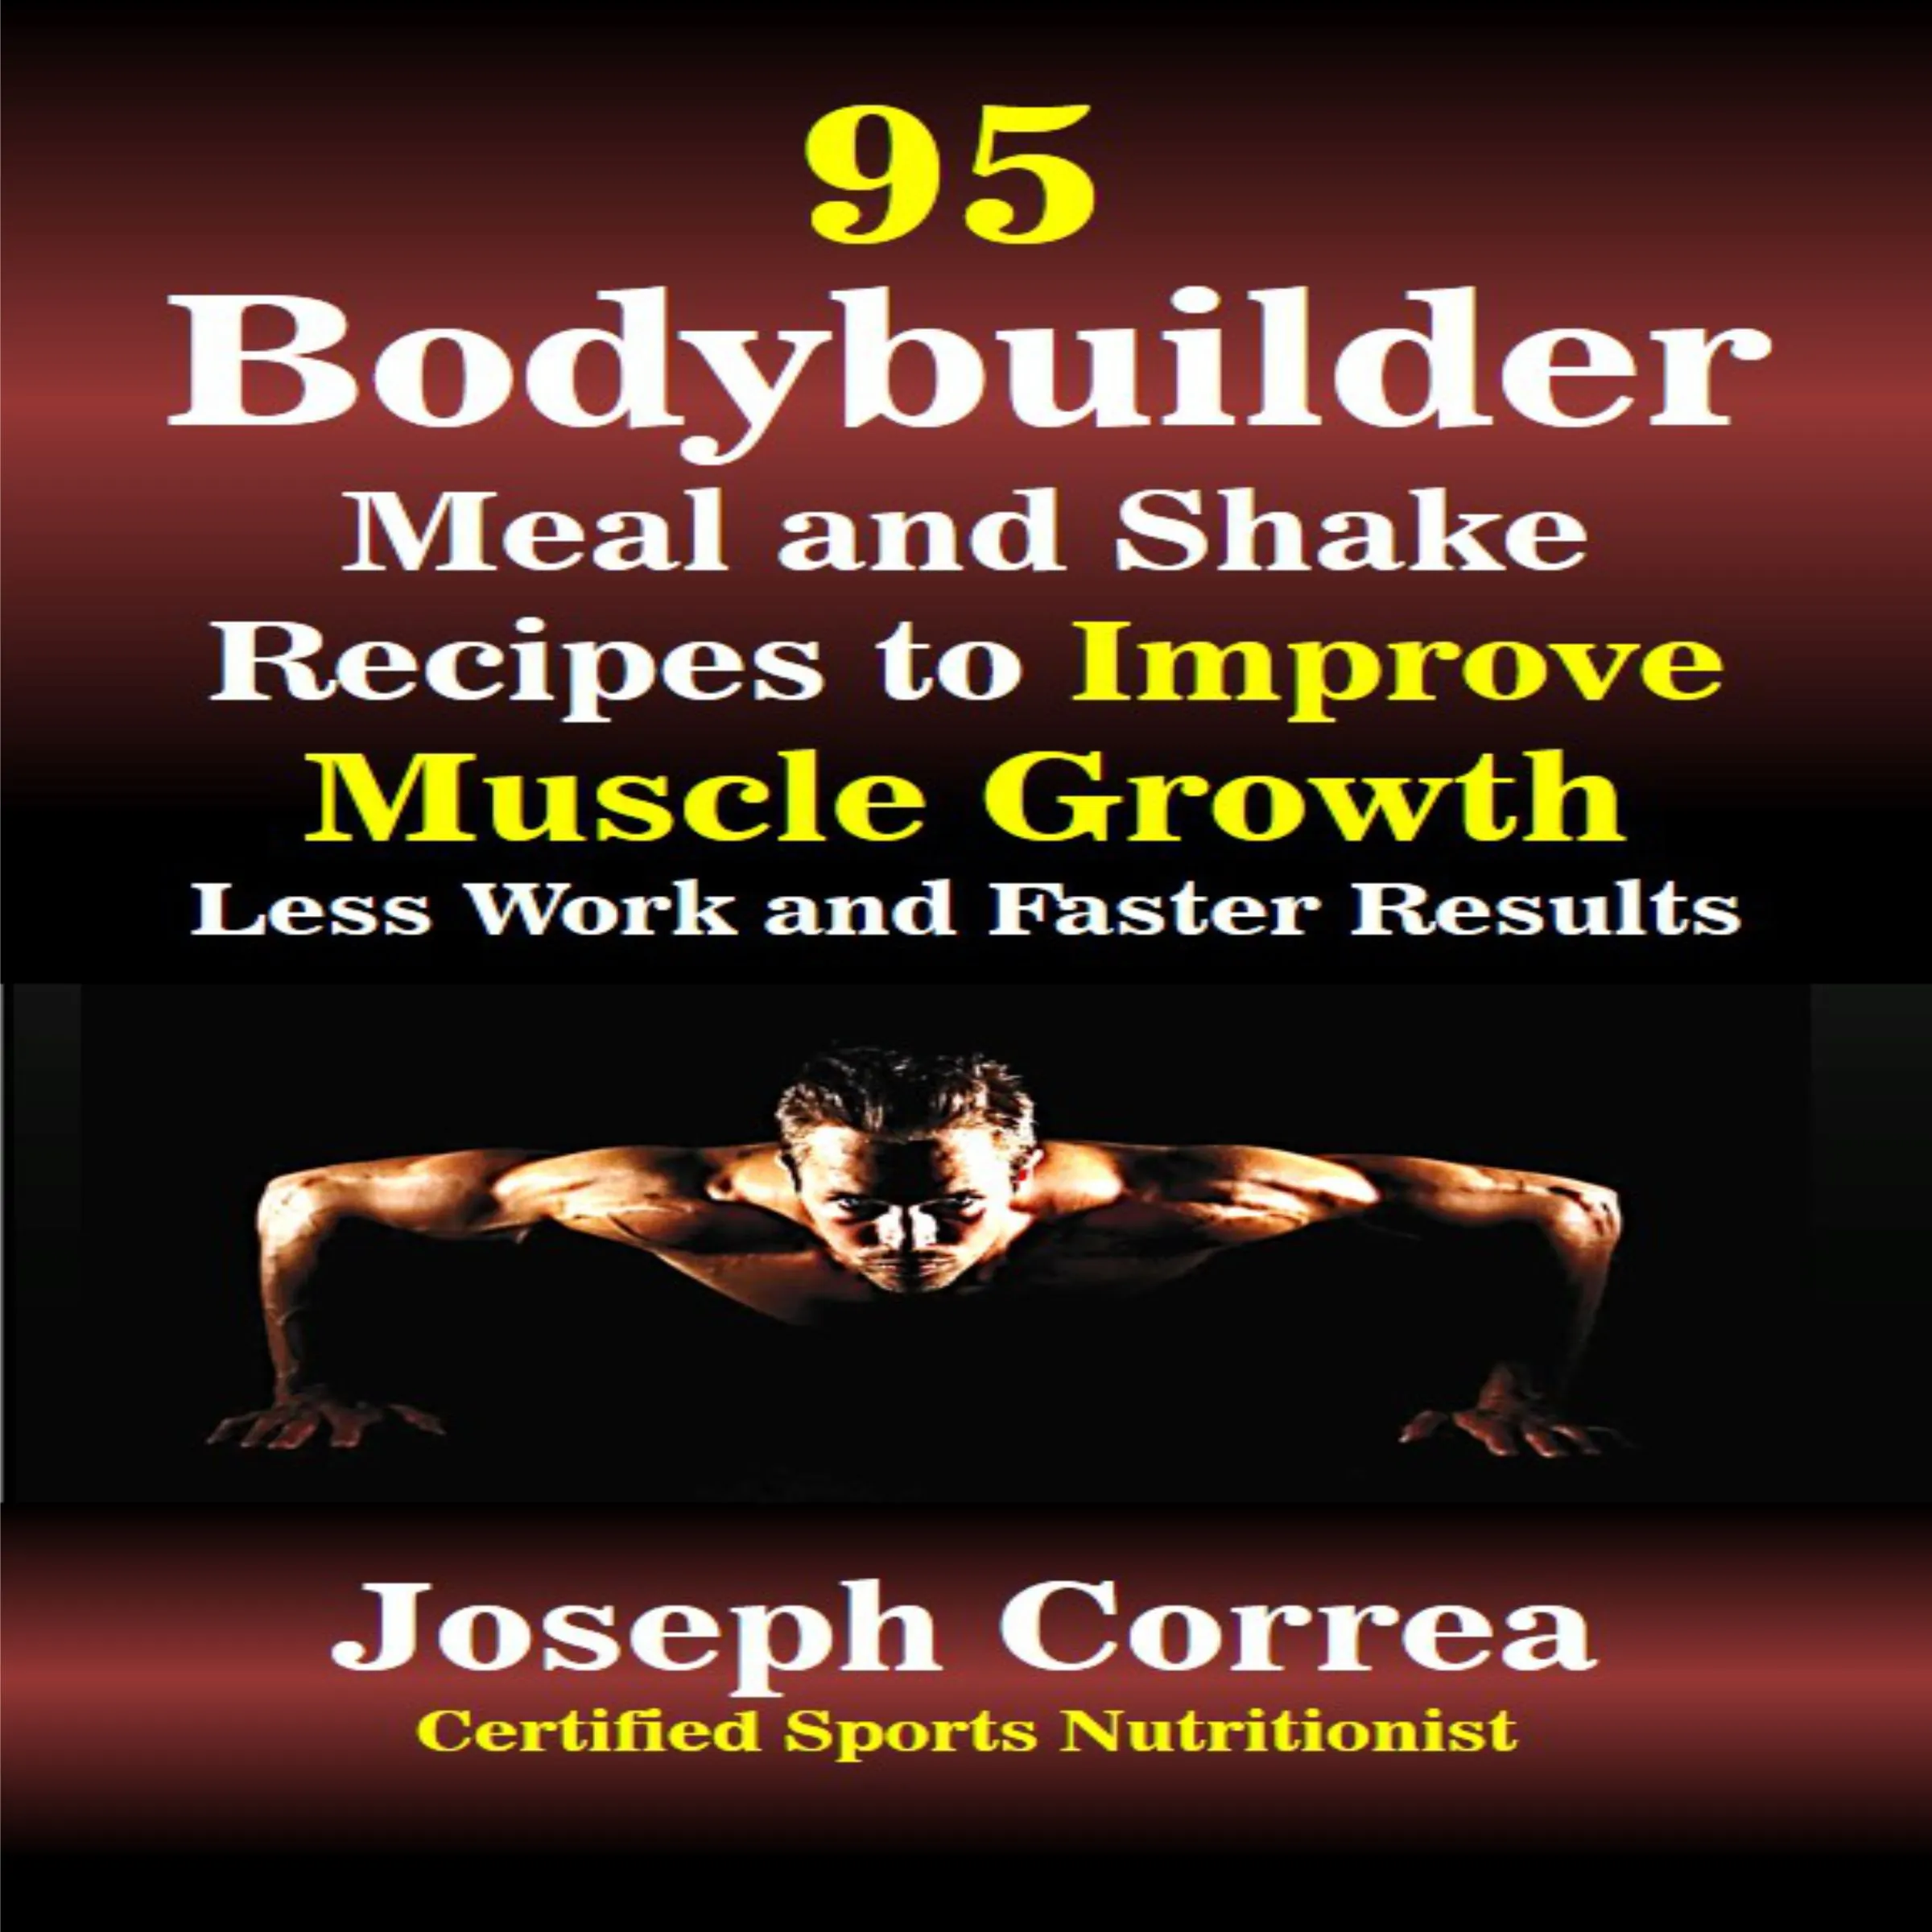 95 Bodybuilder Meal and Shake Recipes to Improve Muscle Growth: Less Work and Faster Results Audiobook by Joseph Correa